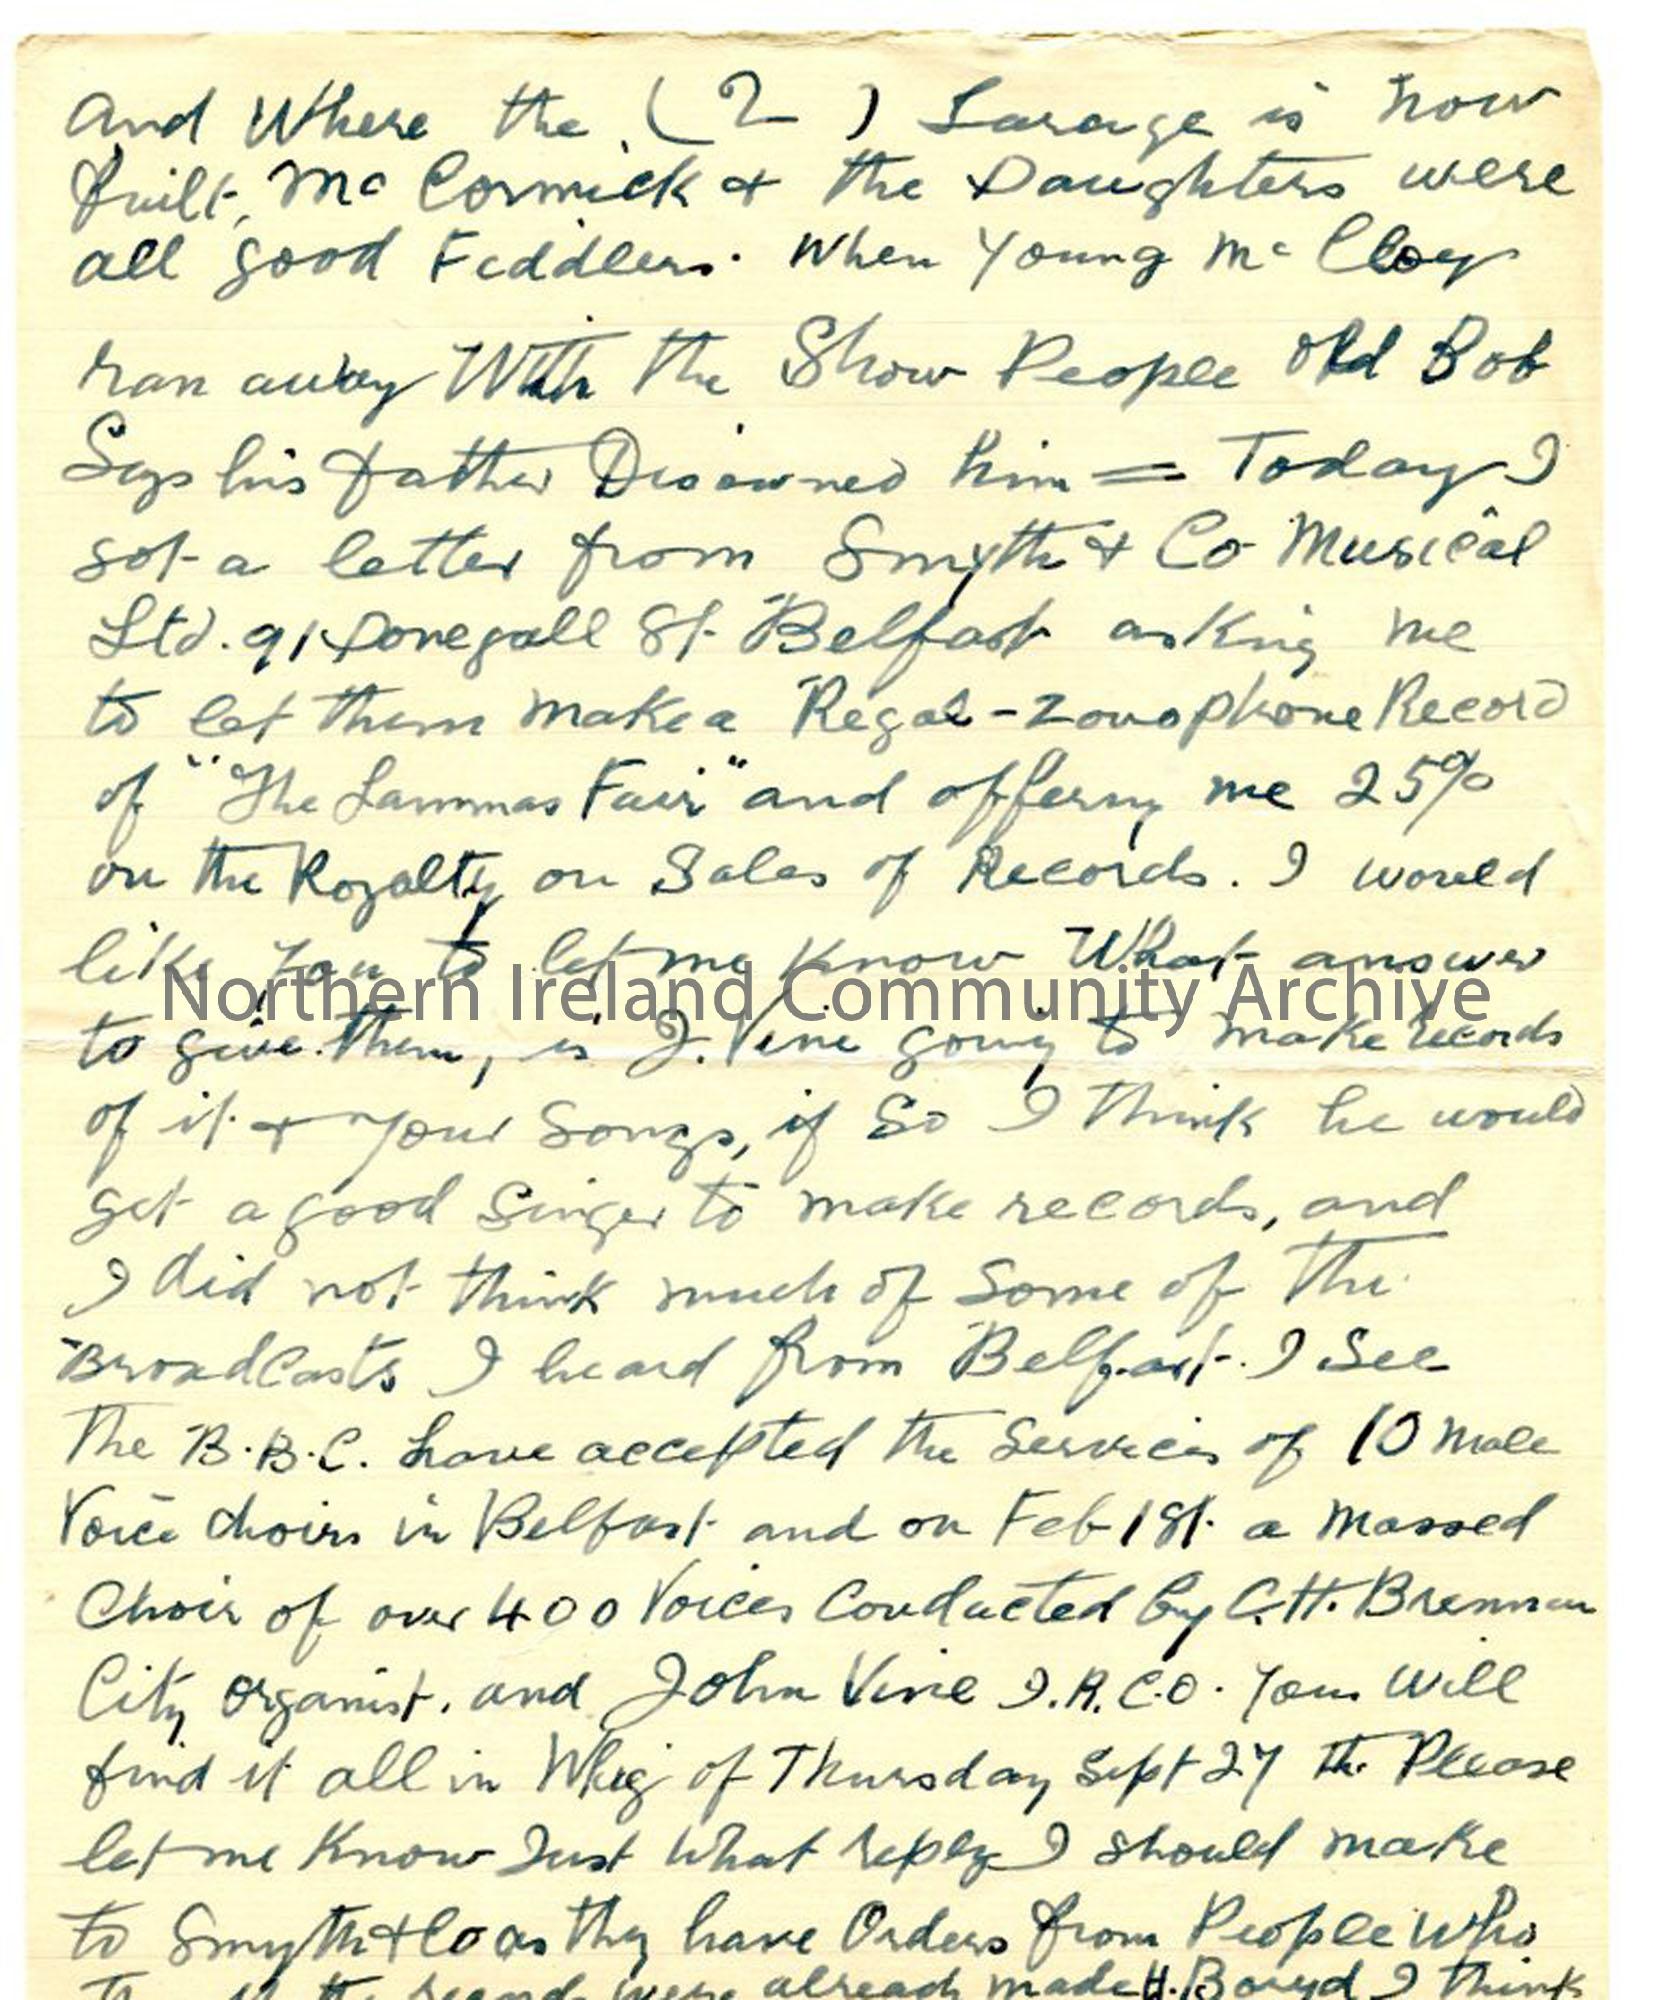 Letter, page 2 of 2, from John MacAulay, 28.9.1934